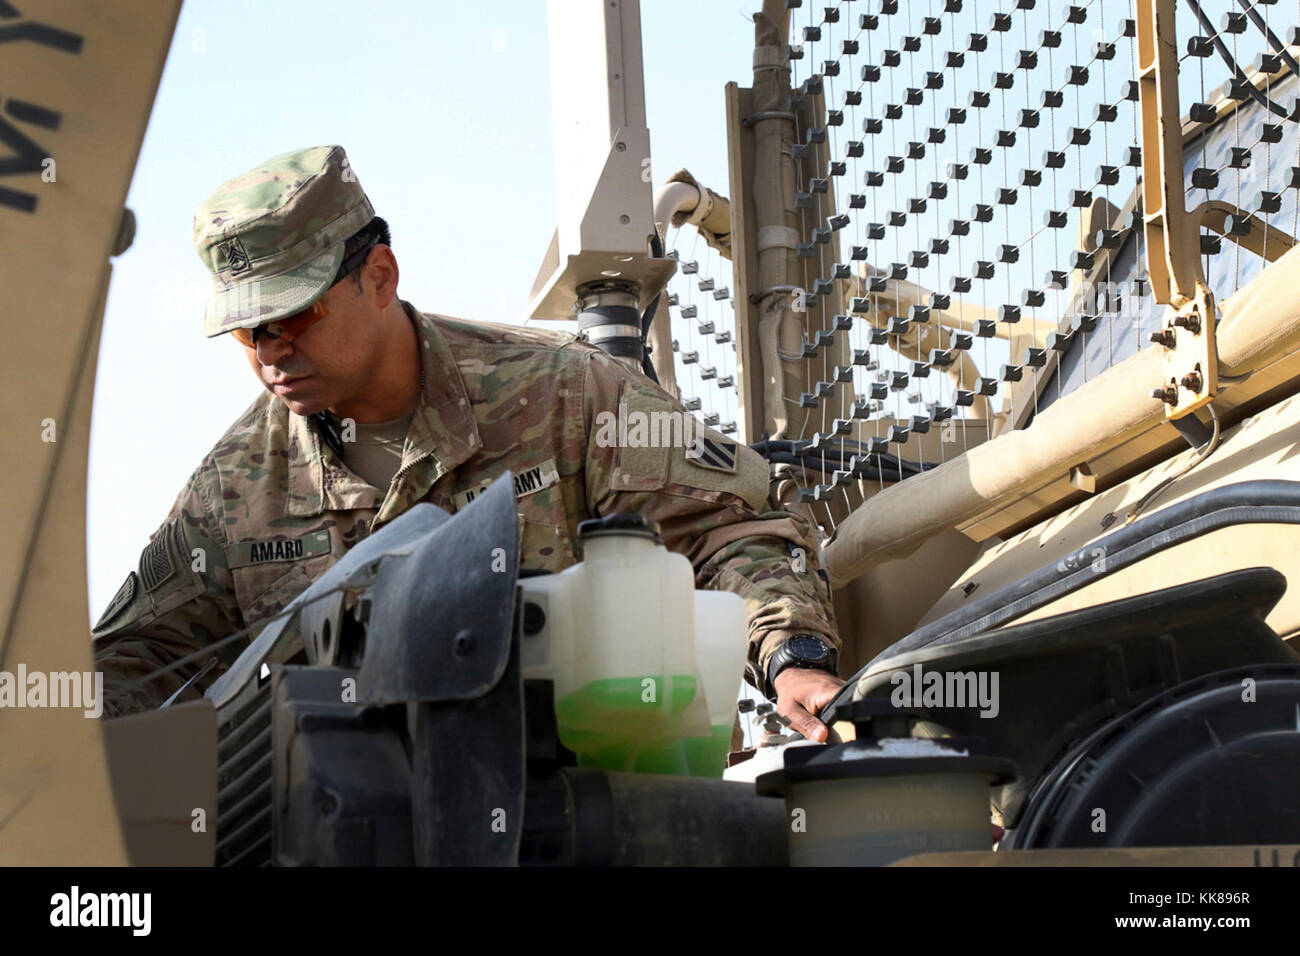 BAGRAM AIRFIELD, Afghanistan - Staff Sgt. Arturo Amaro, the master driver for the 3rd Special Troops Battalion, 3rd Infantry Division Resolute Support Sustainment Brigade, checks fluid levels in a MaxxPro II mine-resistant, ambush-protected vehicle during a master driver training course Nov. 8 at Bagram Airfield, Afghanistan. Amaro is the sole master driver for the 3rd Inf. Div. RSSB and will, once certified through this course, be able to train Soldiers from all over the Command Joint Operations Area - Afghanistan. (U.S. Army photo by Spc. Elizabeth White with 3ID RSSB/Released) Stock Photo